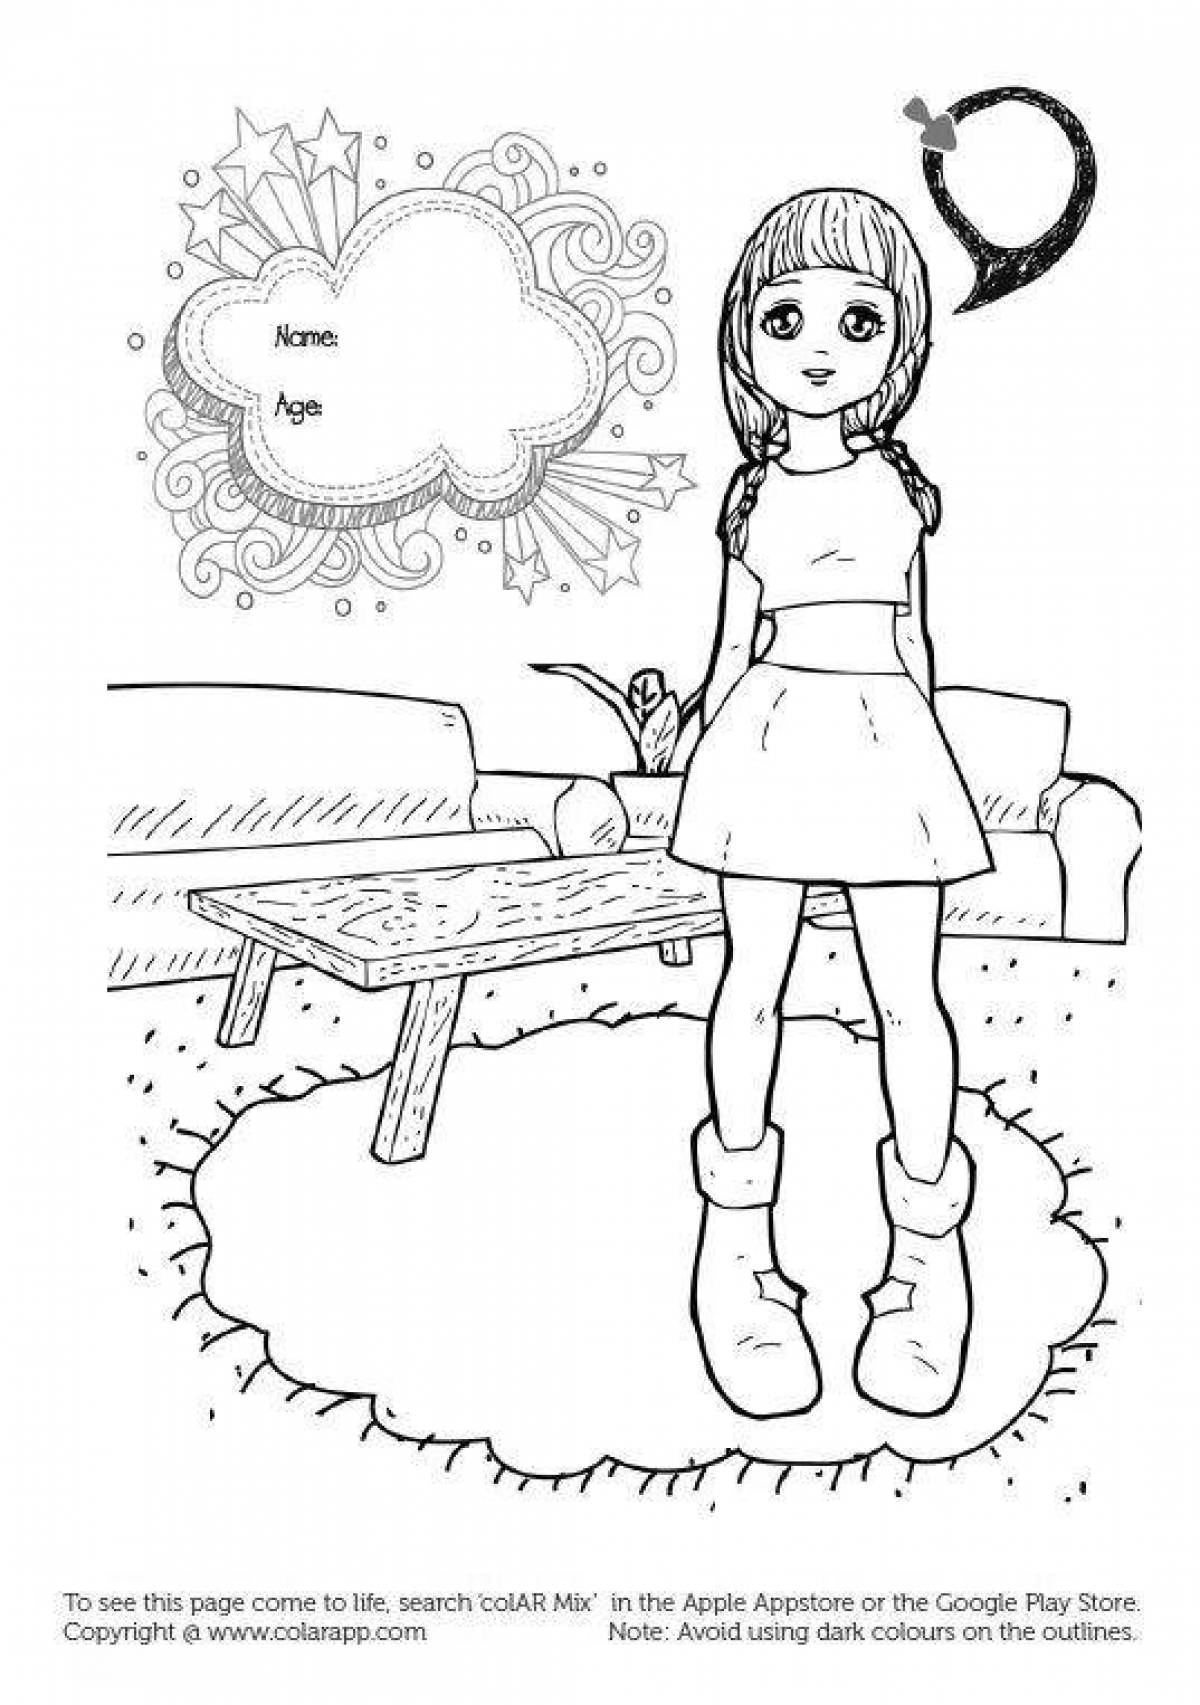 Joyful quivervision coloring page